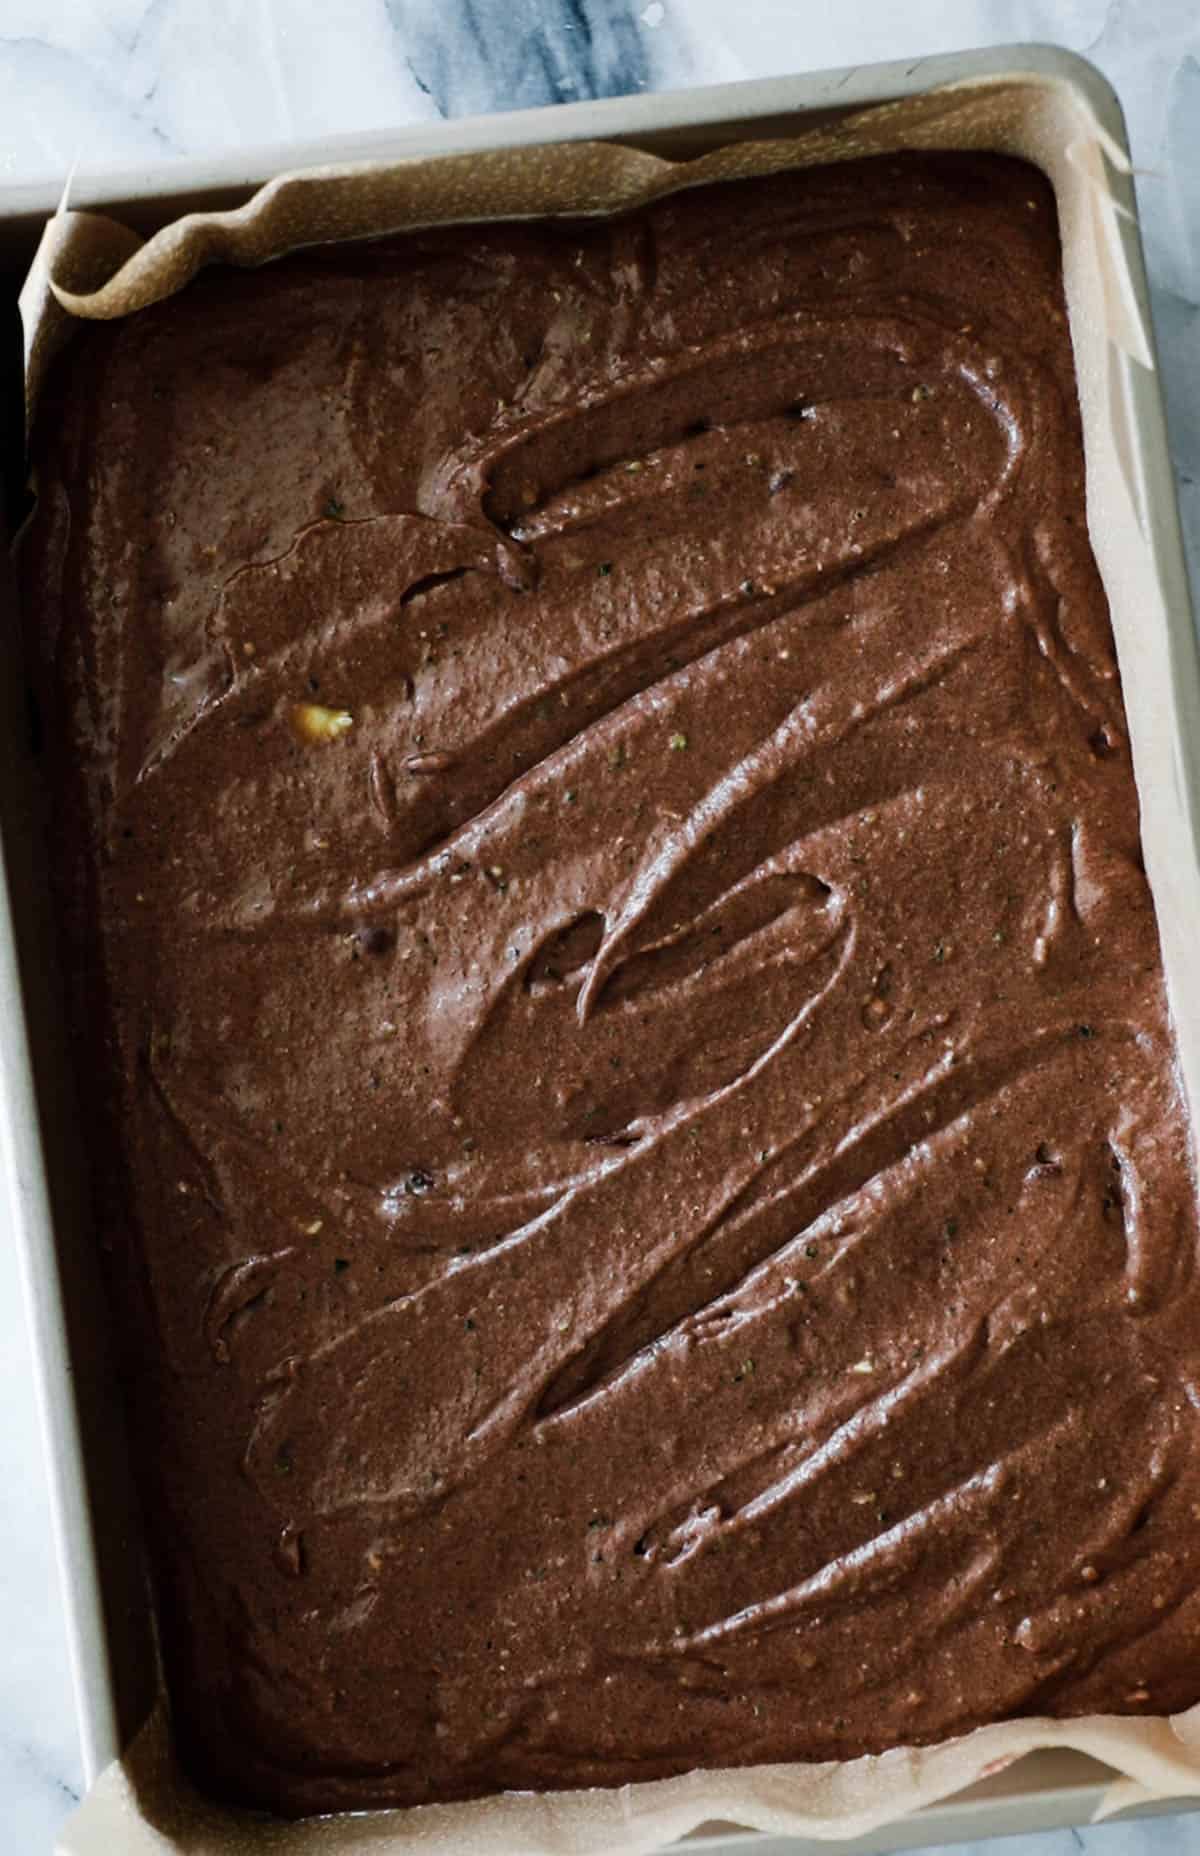 Chocolate zucchini cake batter in a lined with parchment paper.